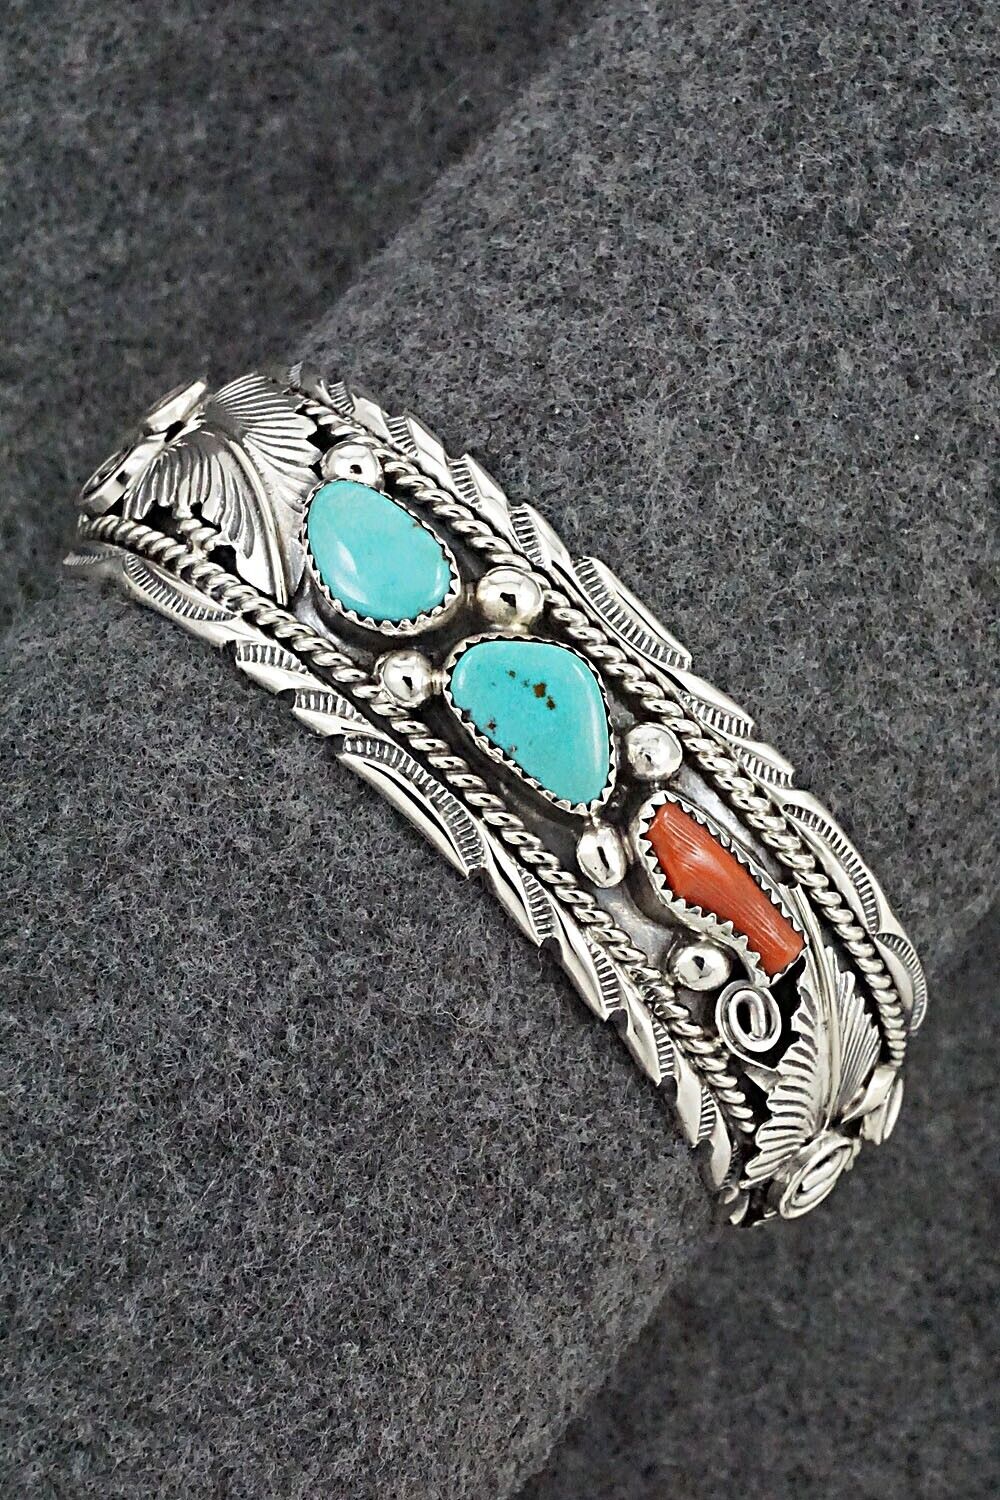 Turquoise, Coral & Sterling Silver Bracelet - Marie Thomas